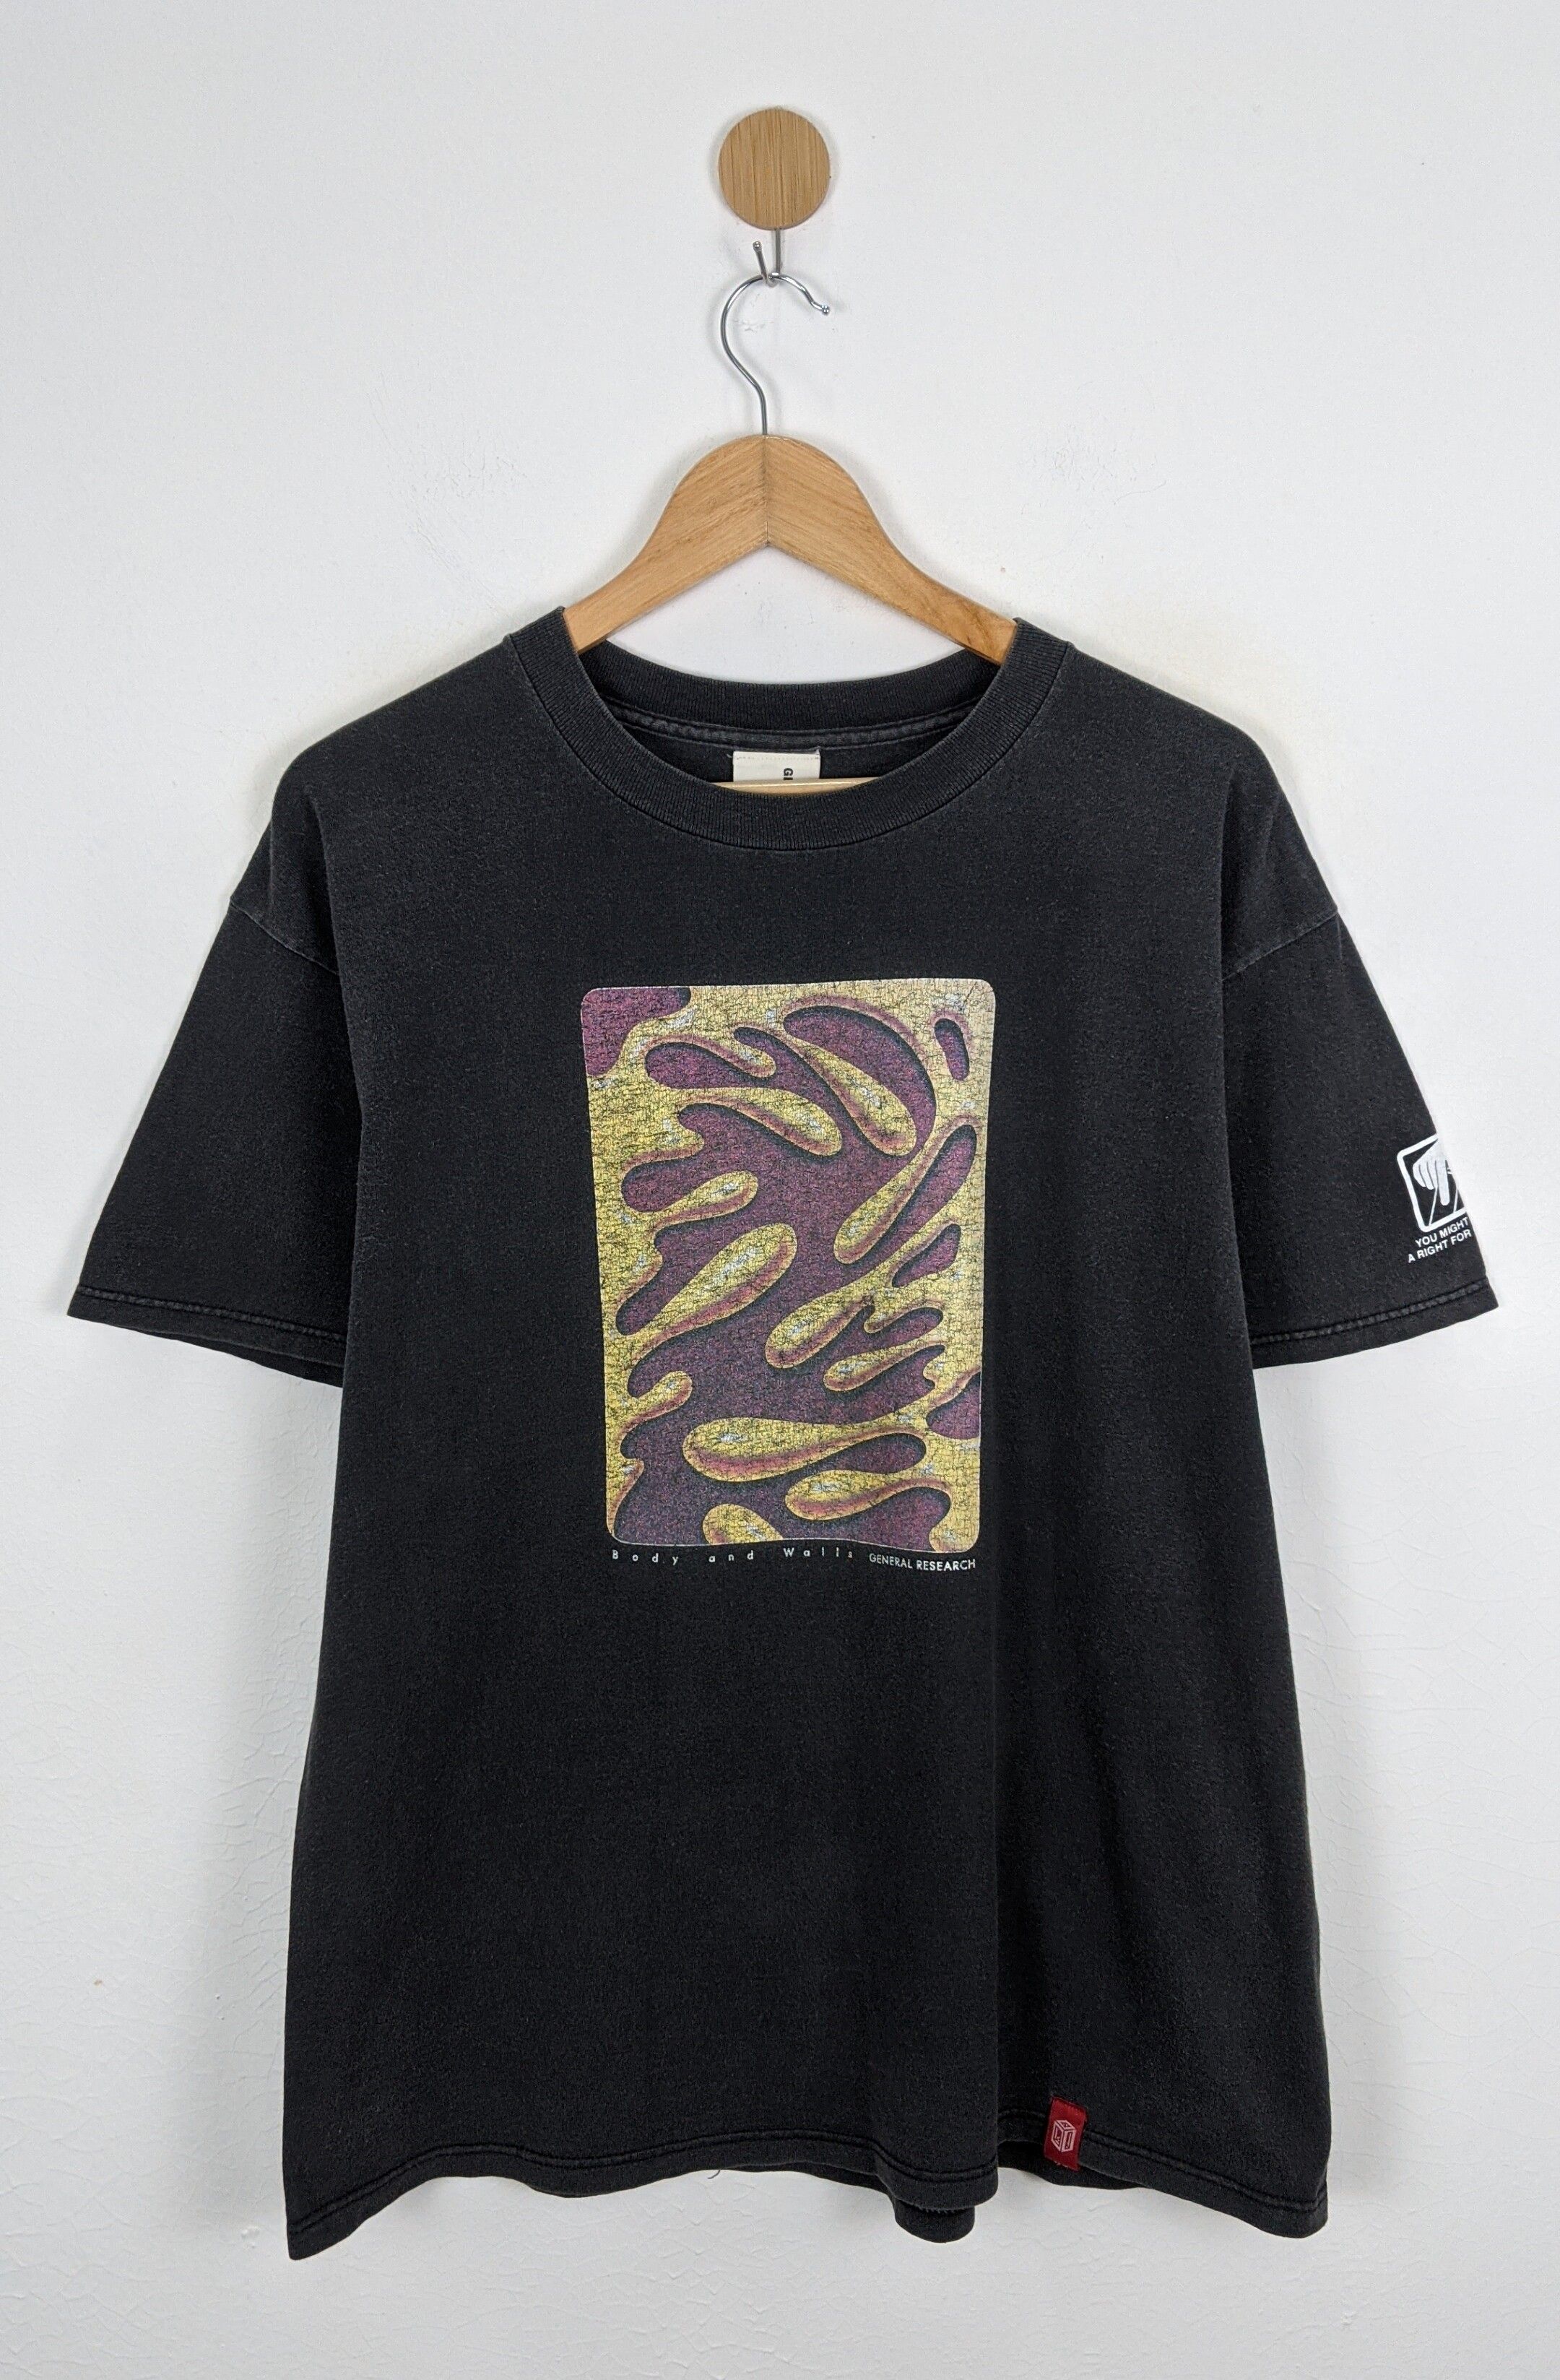 General Research Body And Walls 1998 shirt - 1